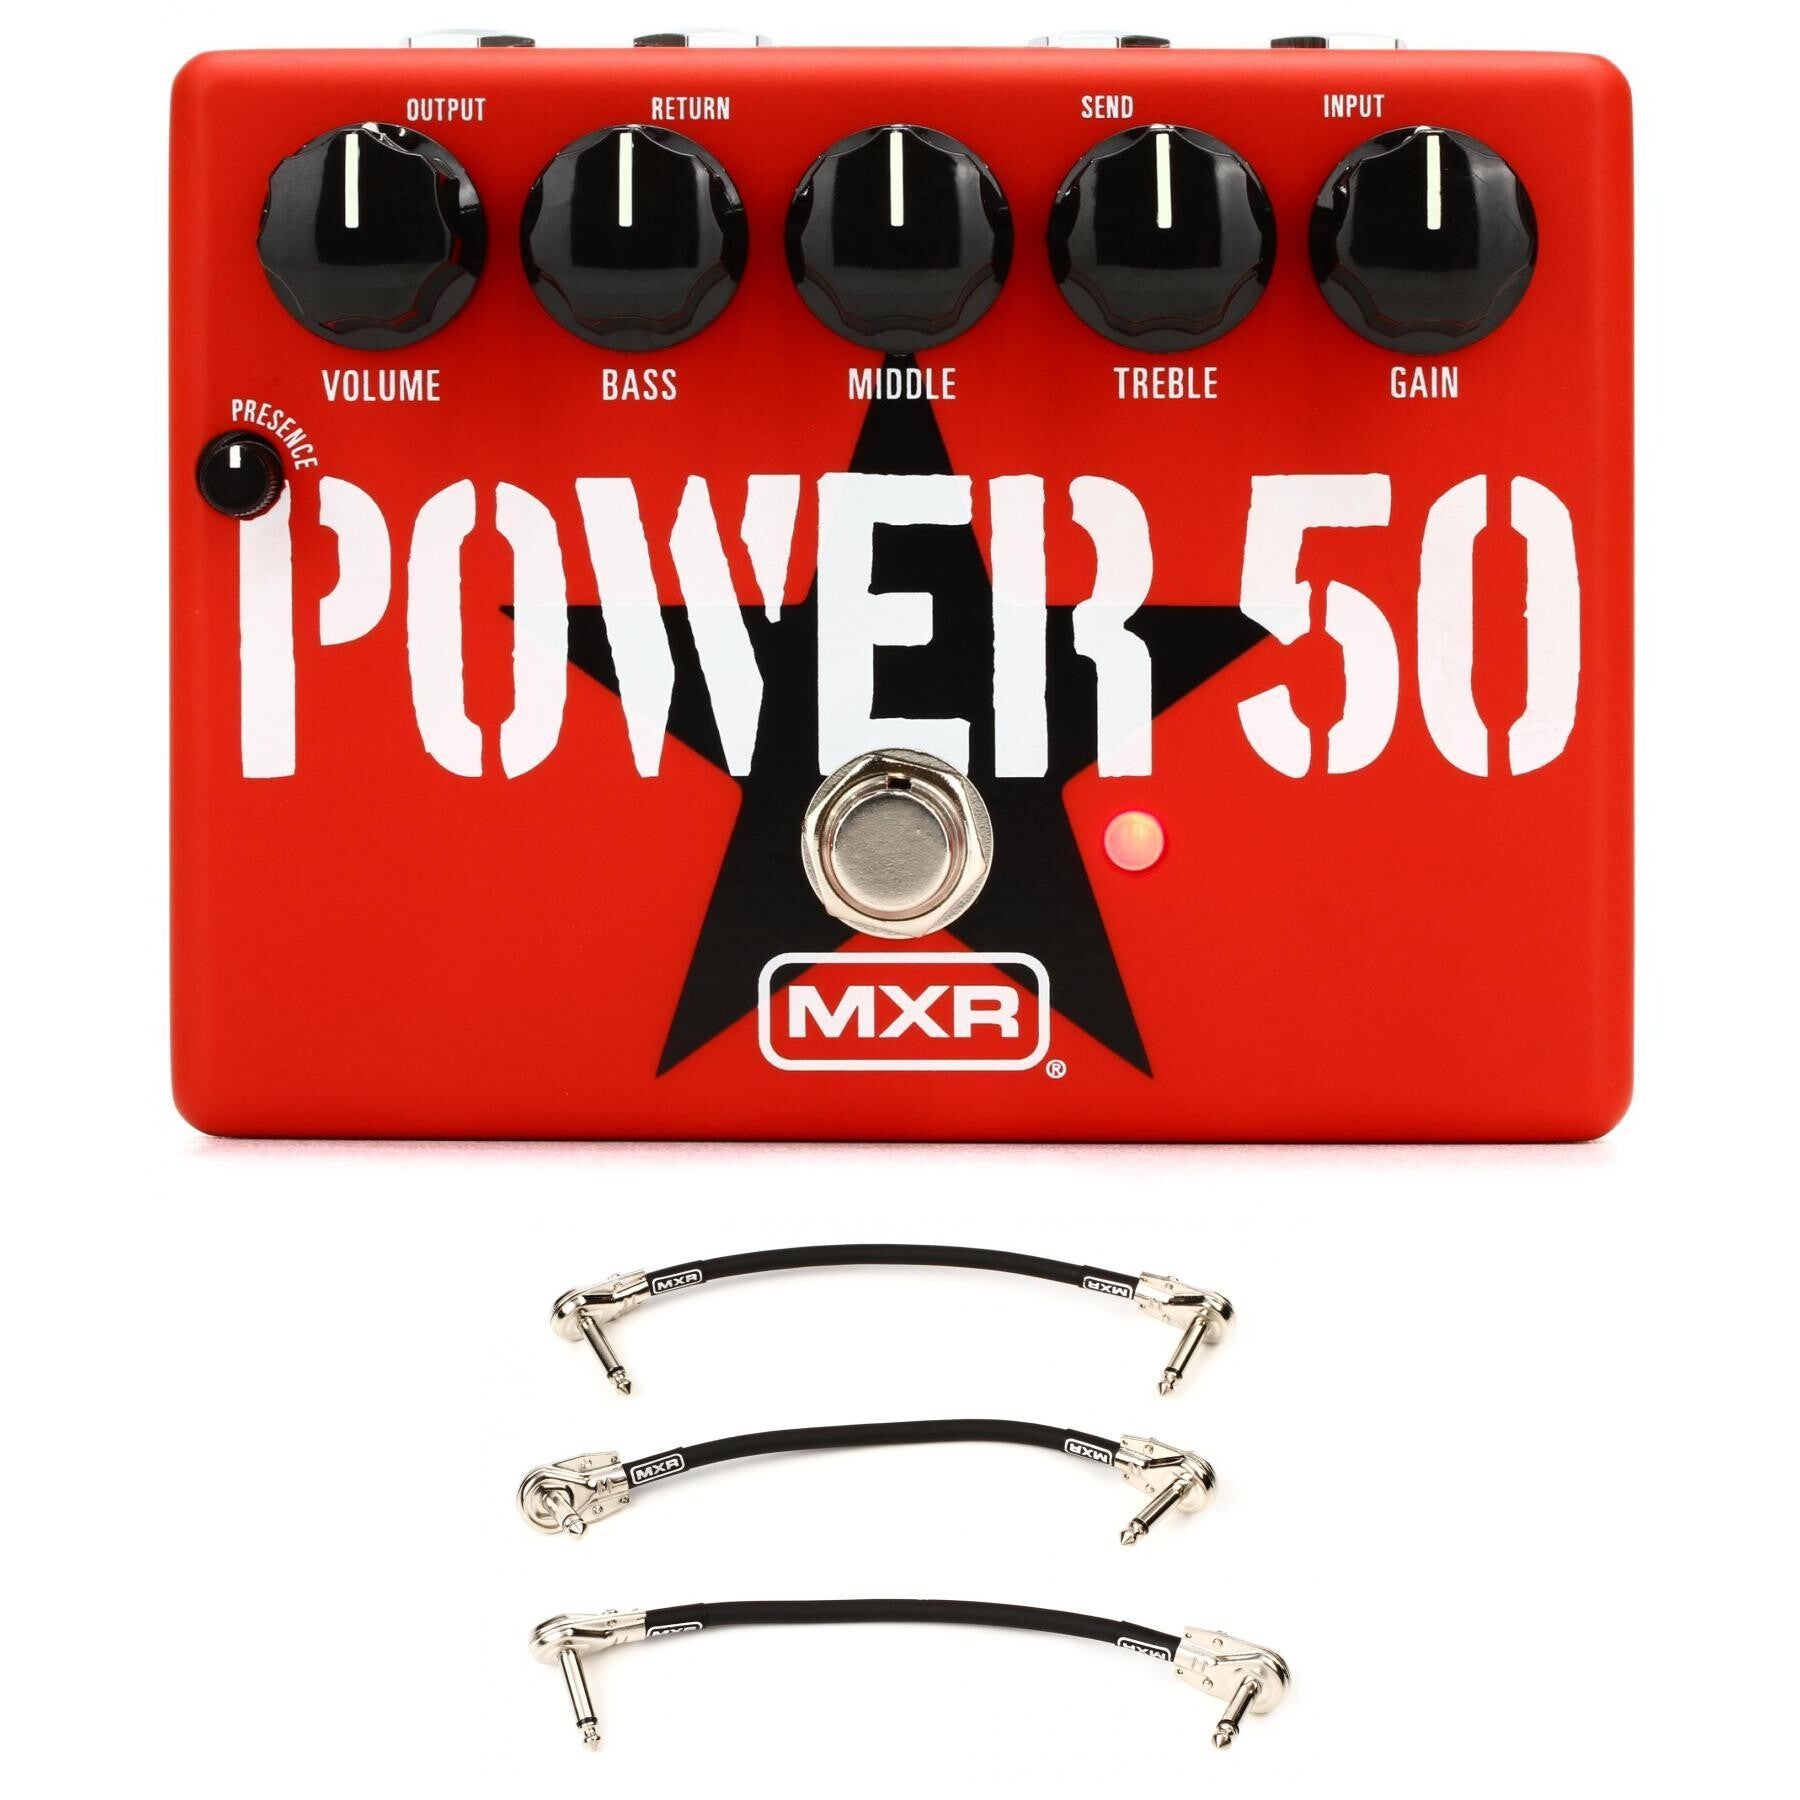 MXR Tom Morello Power 50 Overdrive Pedal with 3 Patch Cables